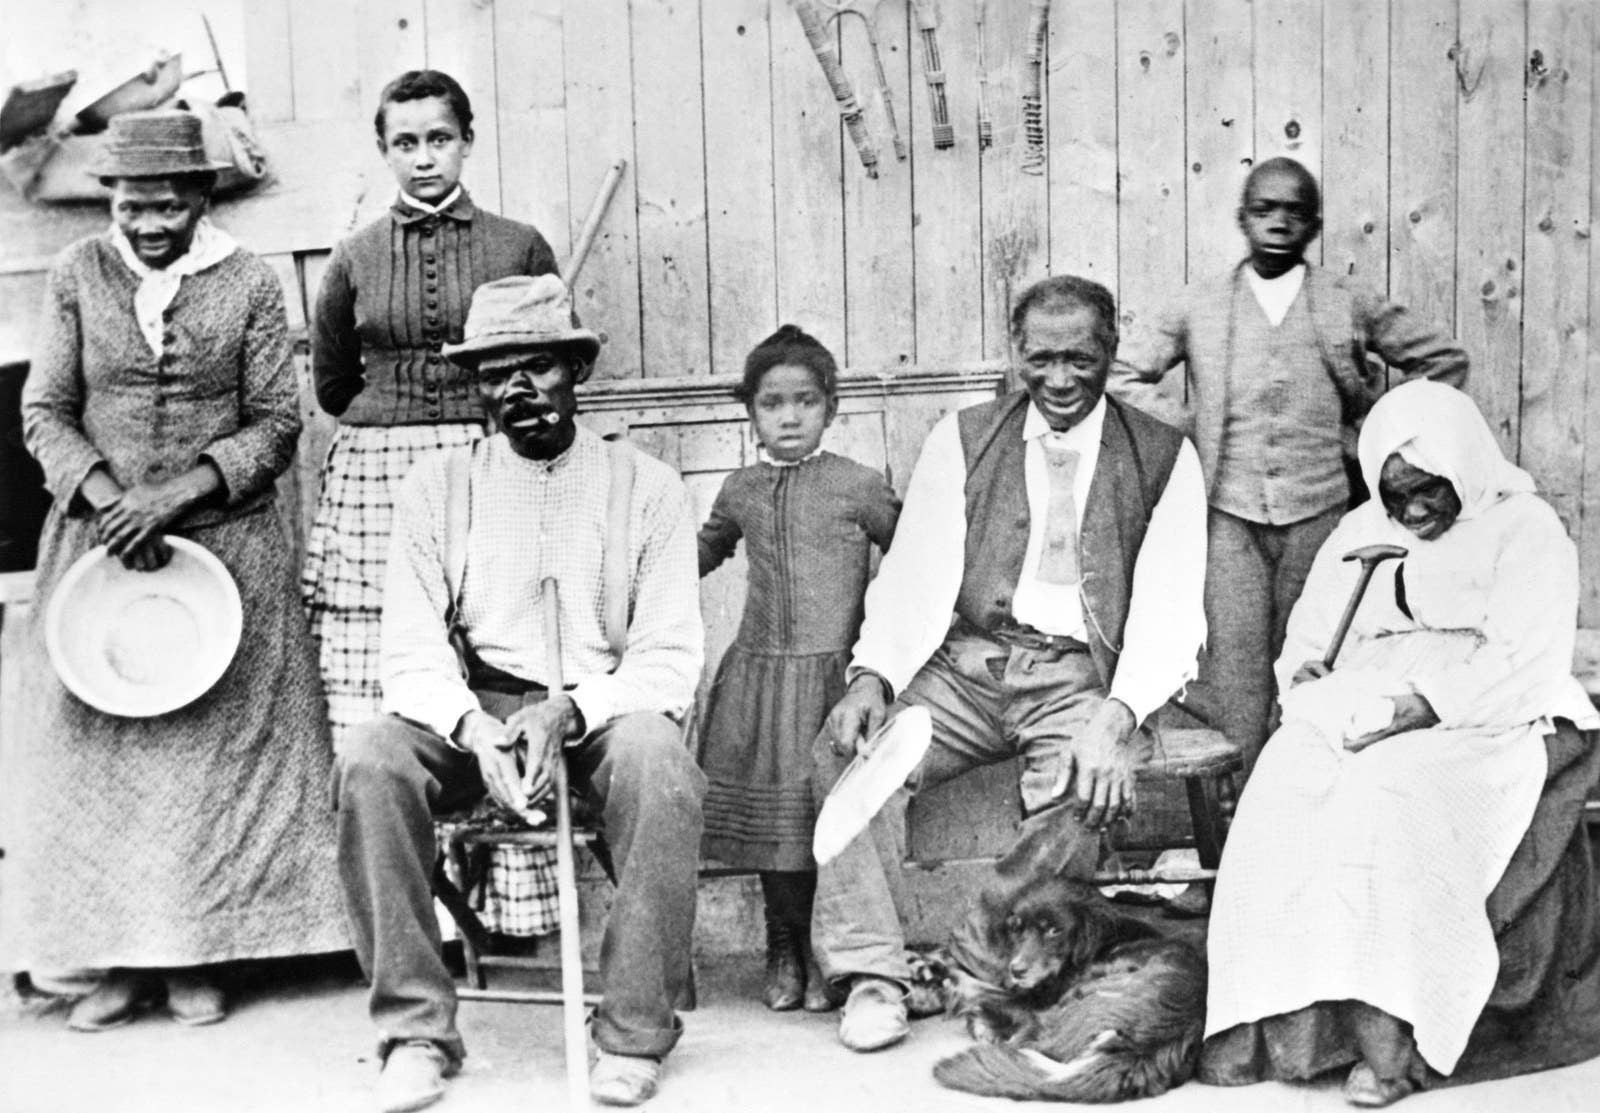 african american people in history